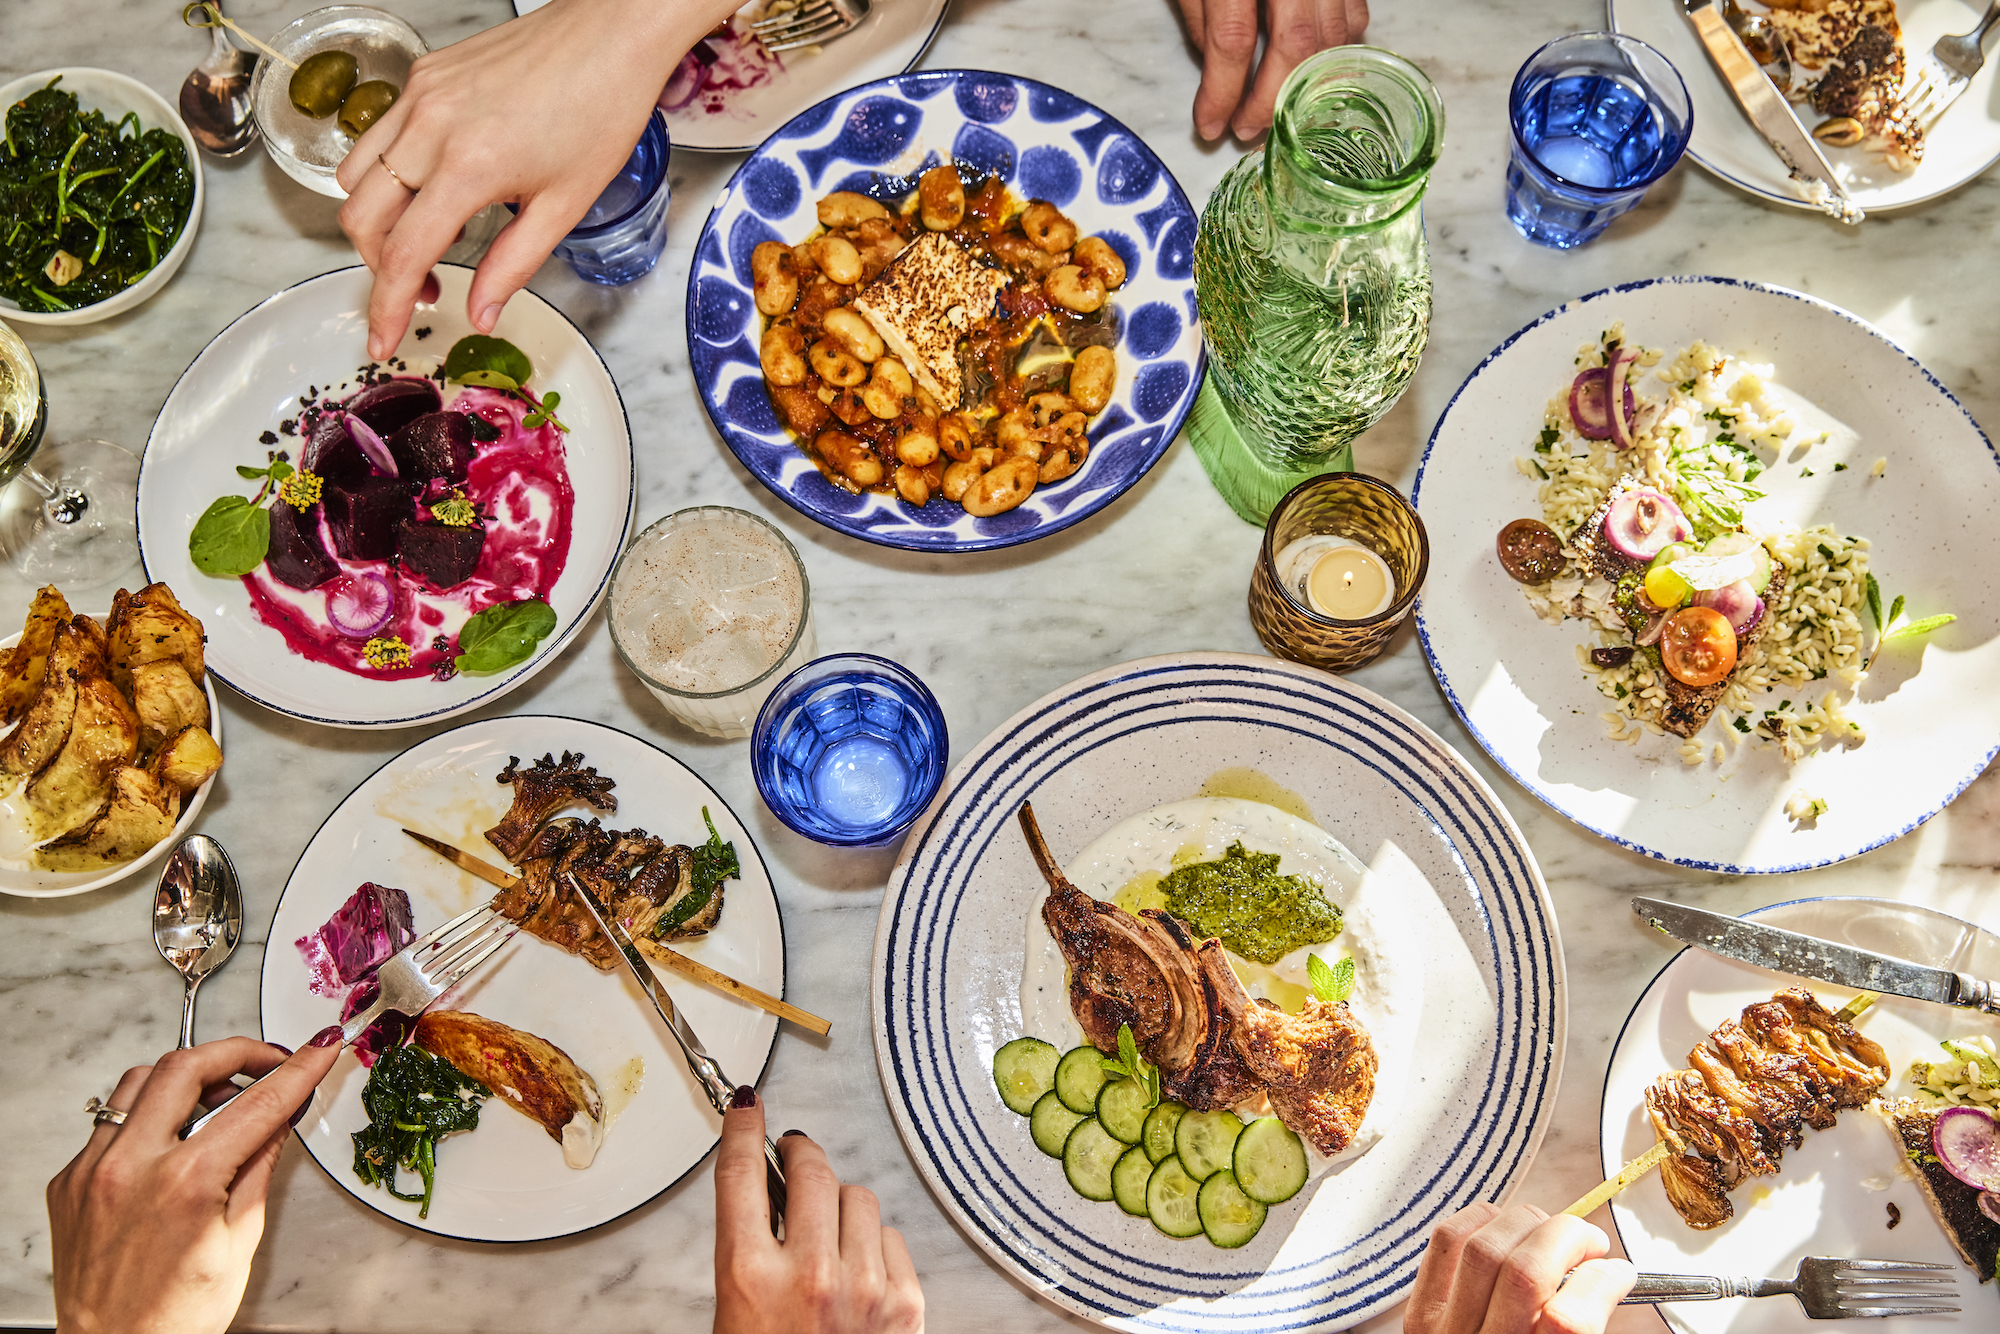 A marble table filled with plates of Greek food like grilled meats, as hands reach in.